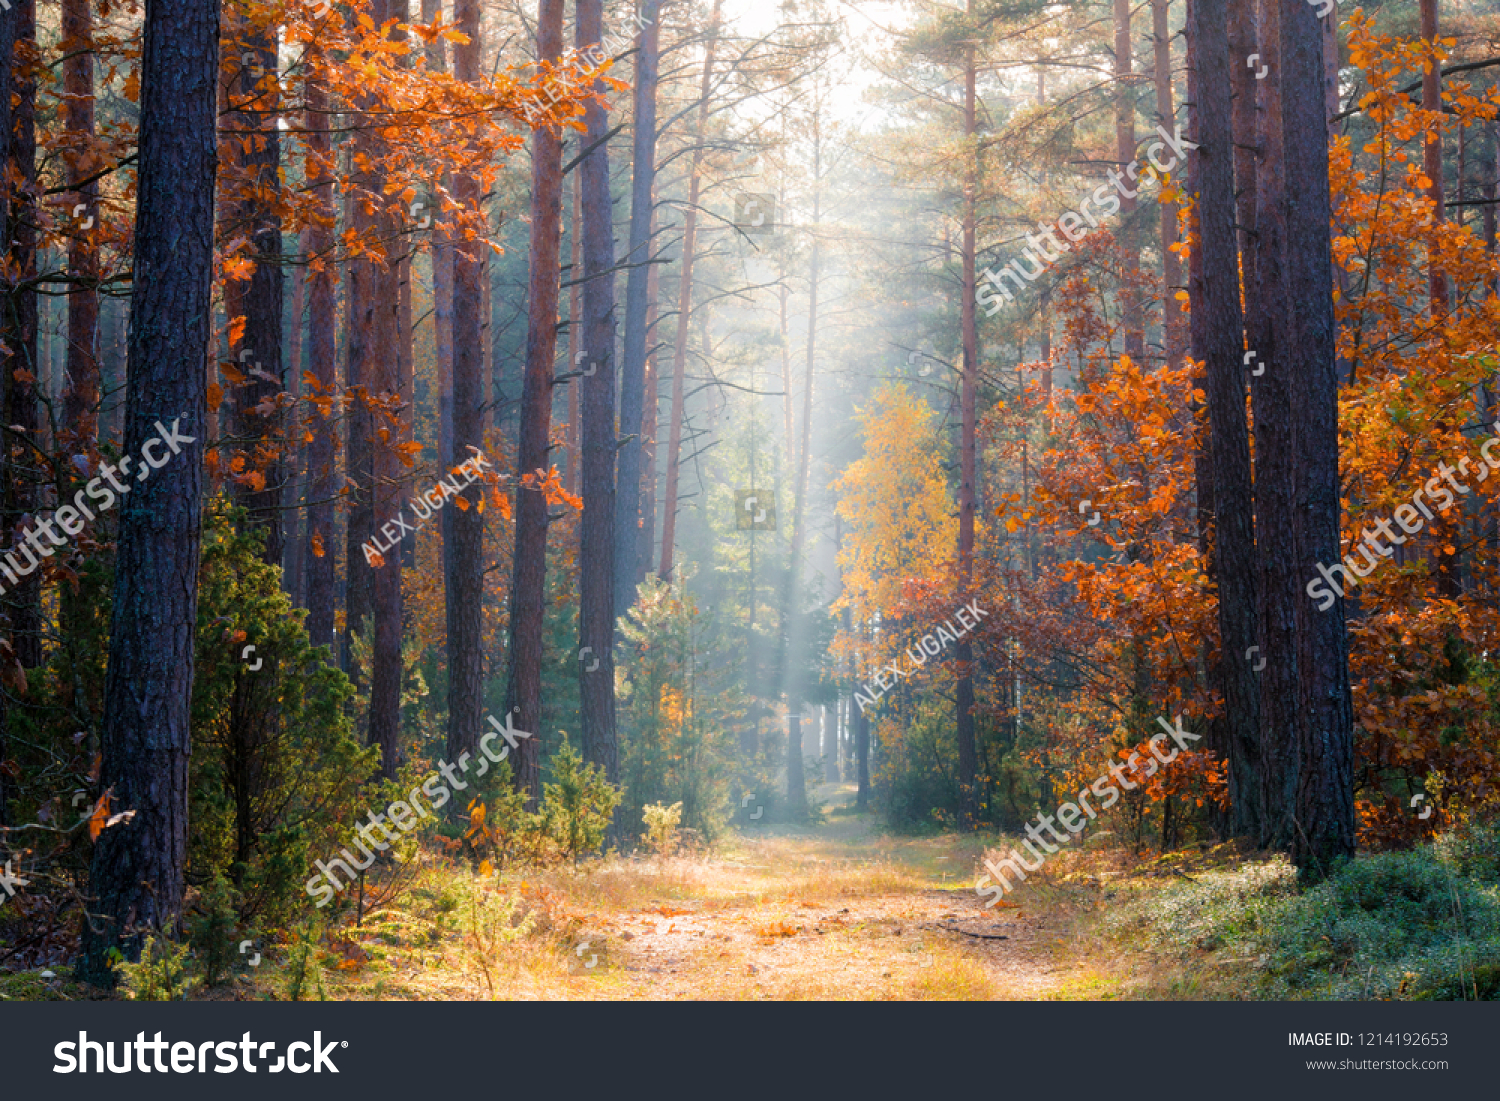 Fall nature. Fall forest. Forest with sunlight. Autumn tranquil background. Autumn scene. #1214192653